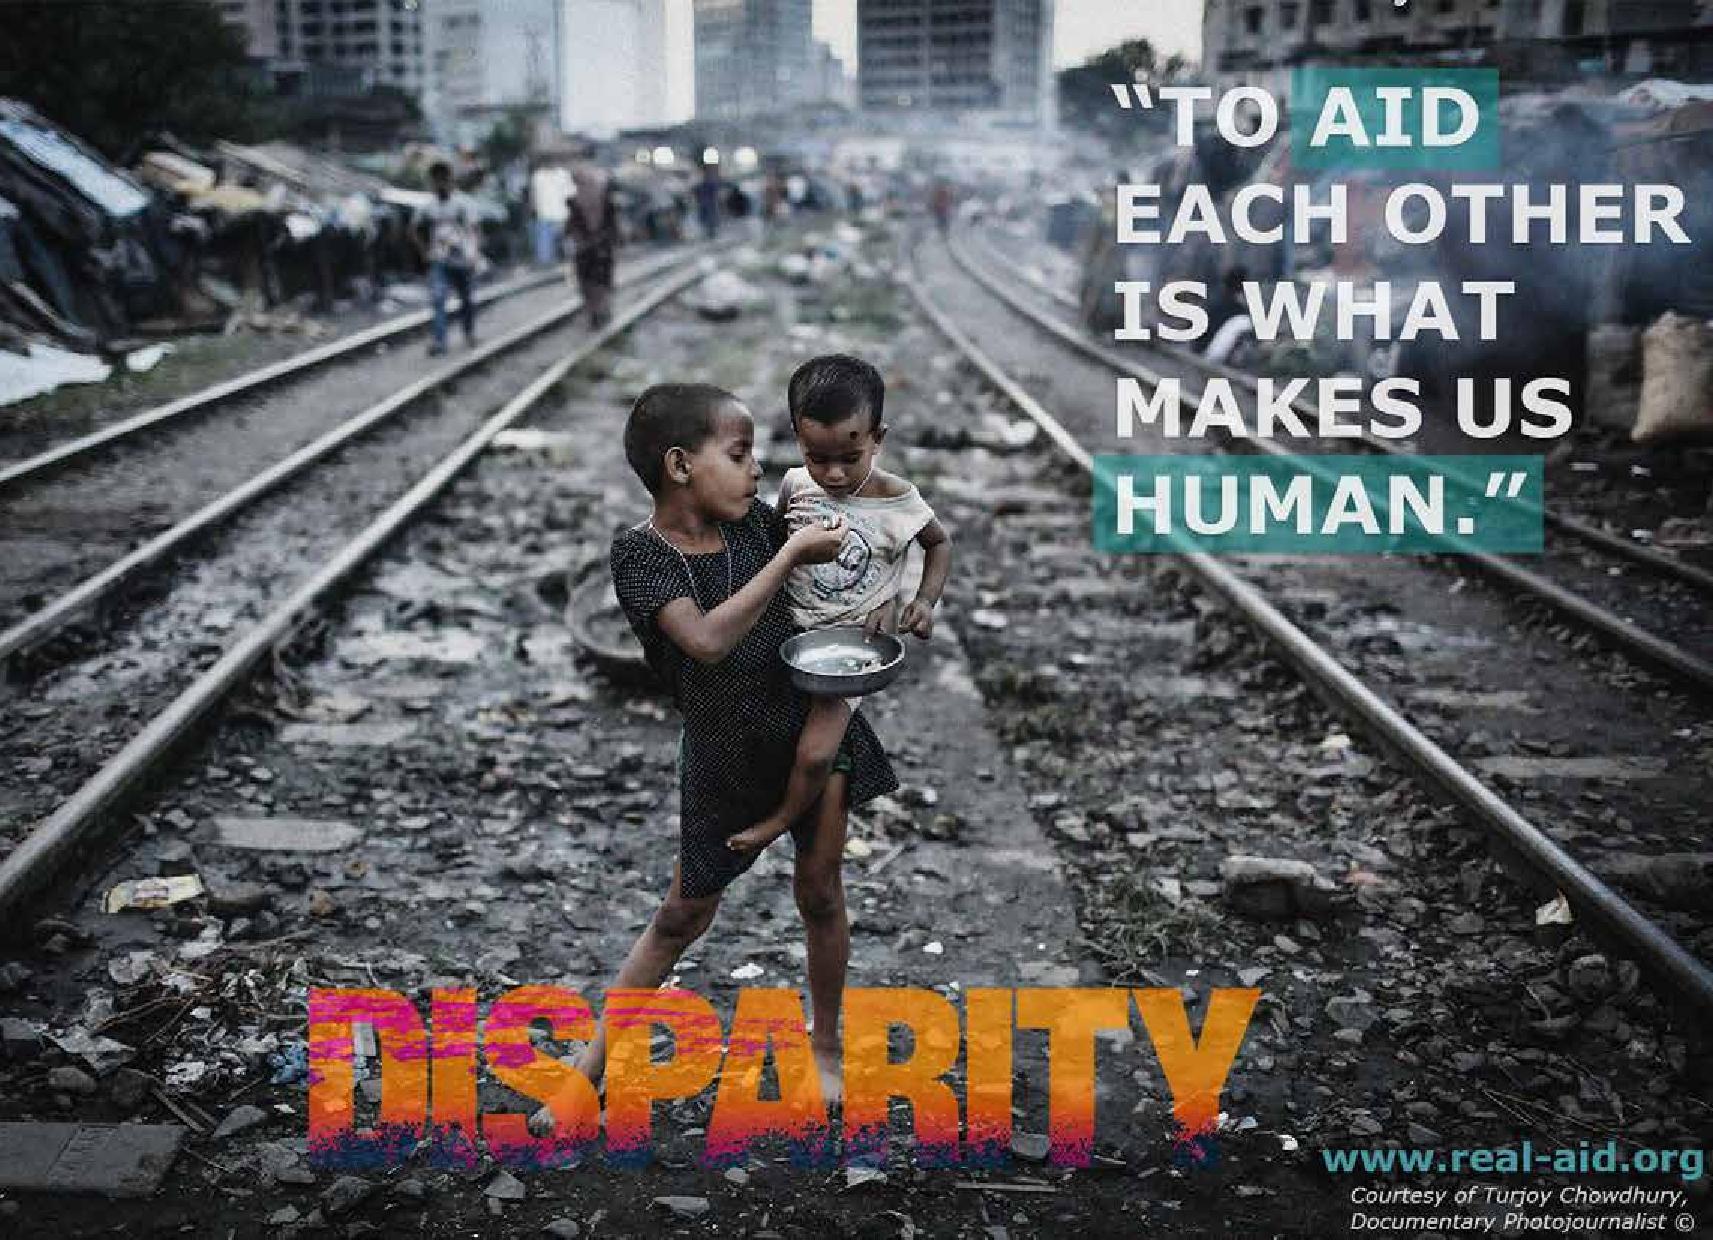 Disparity poster, to aid each other is what makes us human